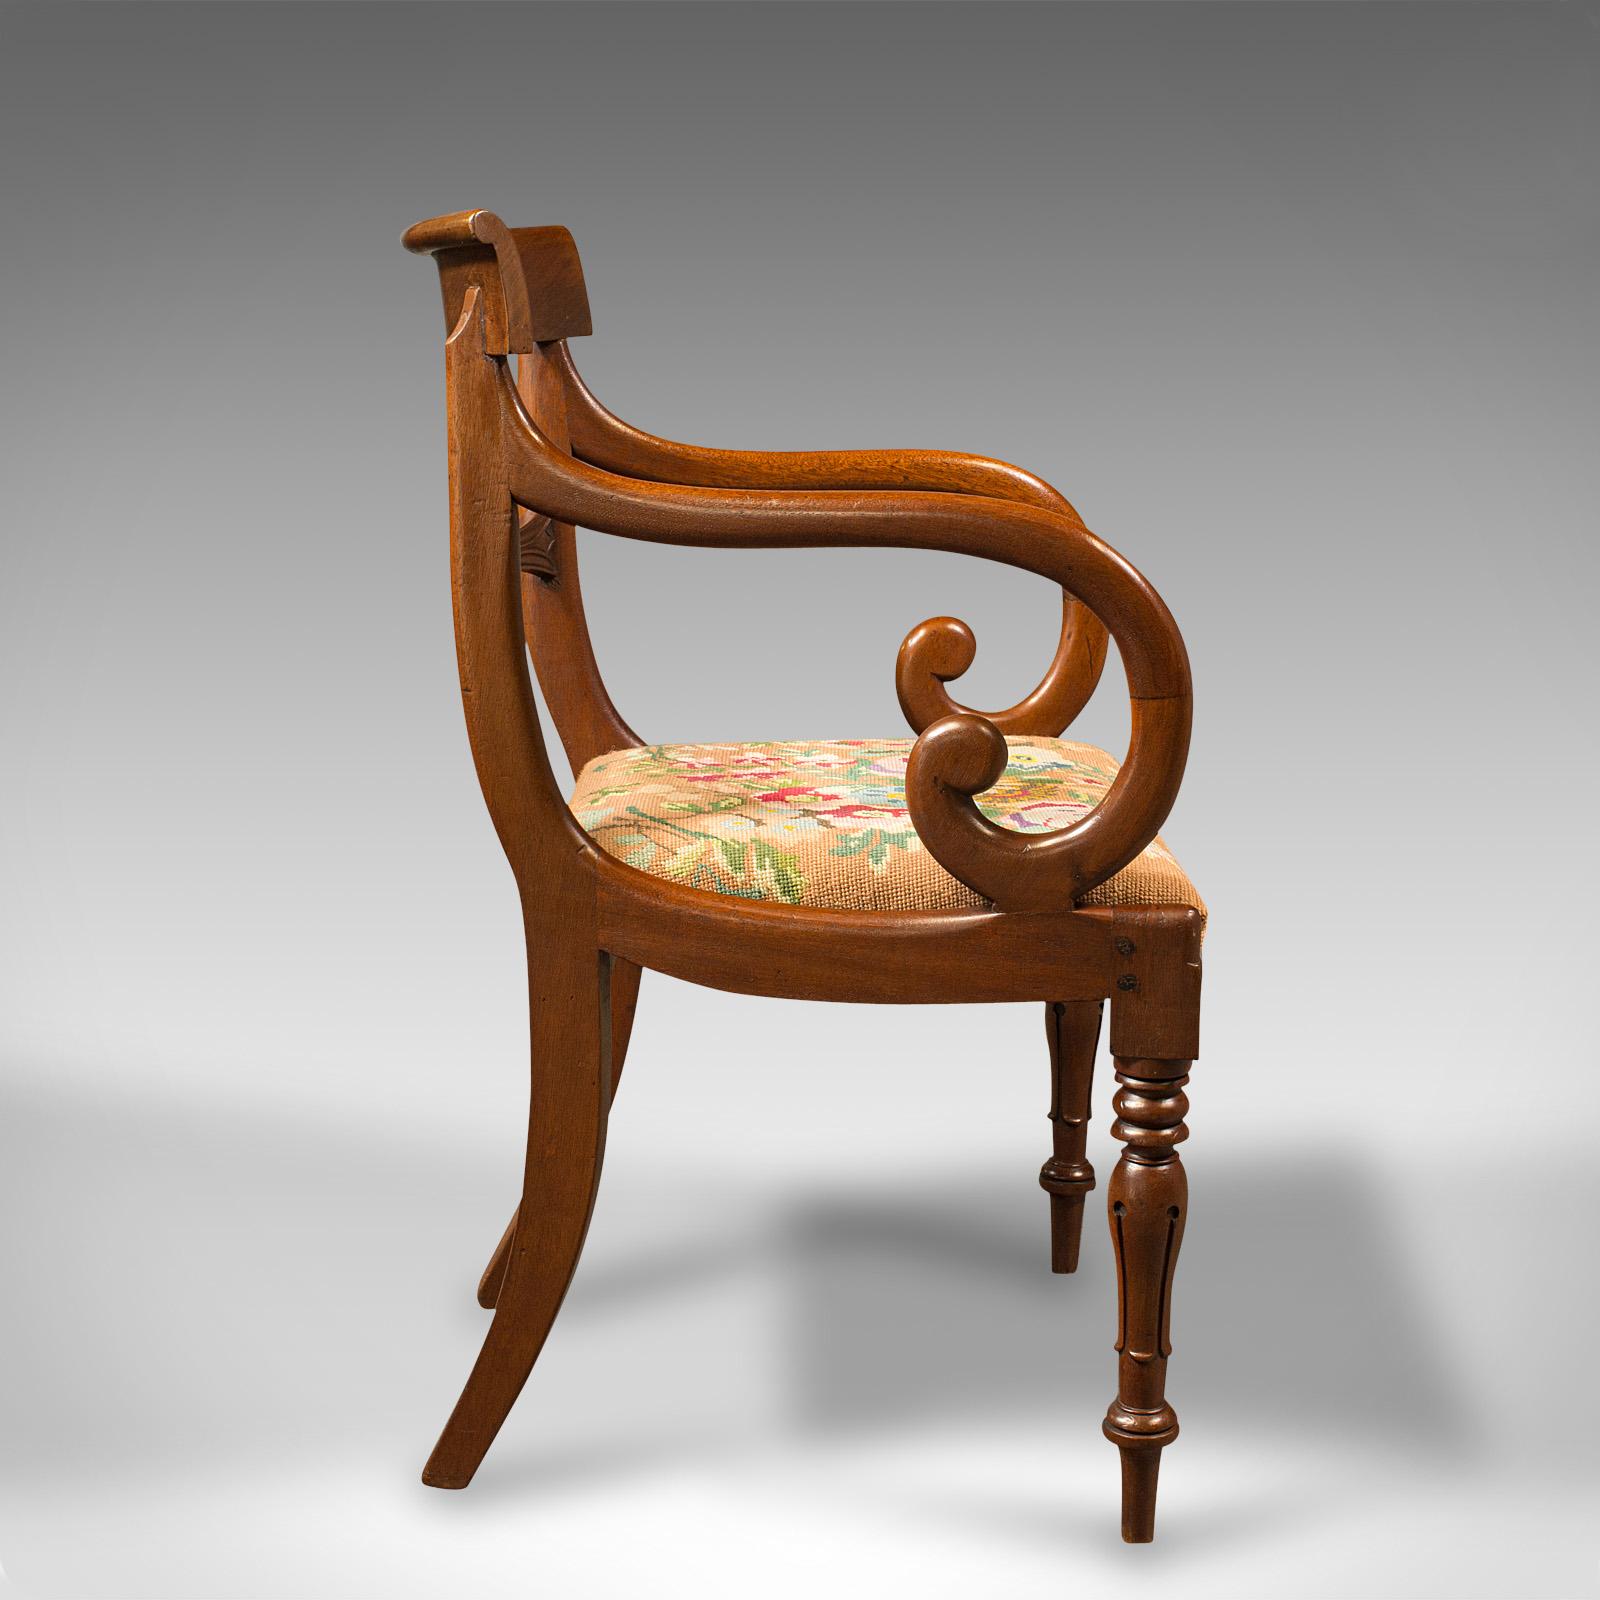 British Antique Scroll Arm Chair, English, Armchair, Desk, Needlepoint, Regency, C.1830 For Sale